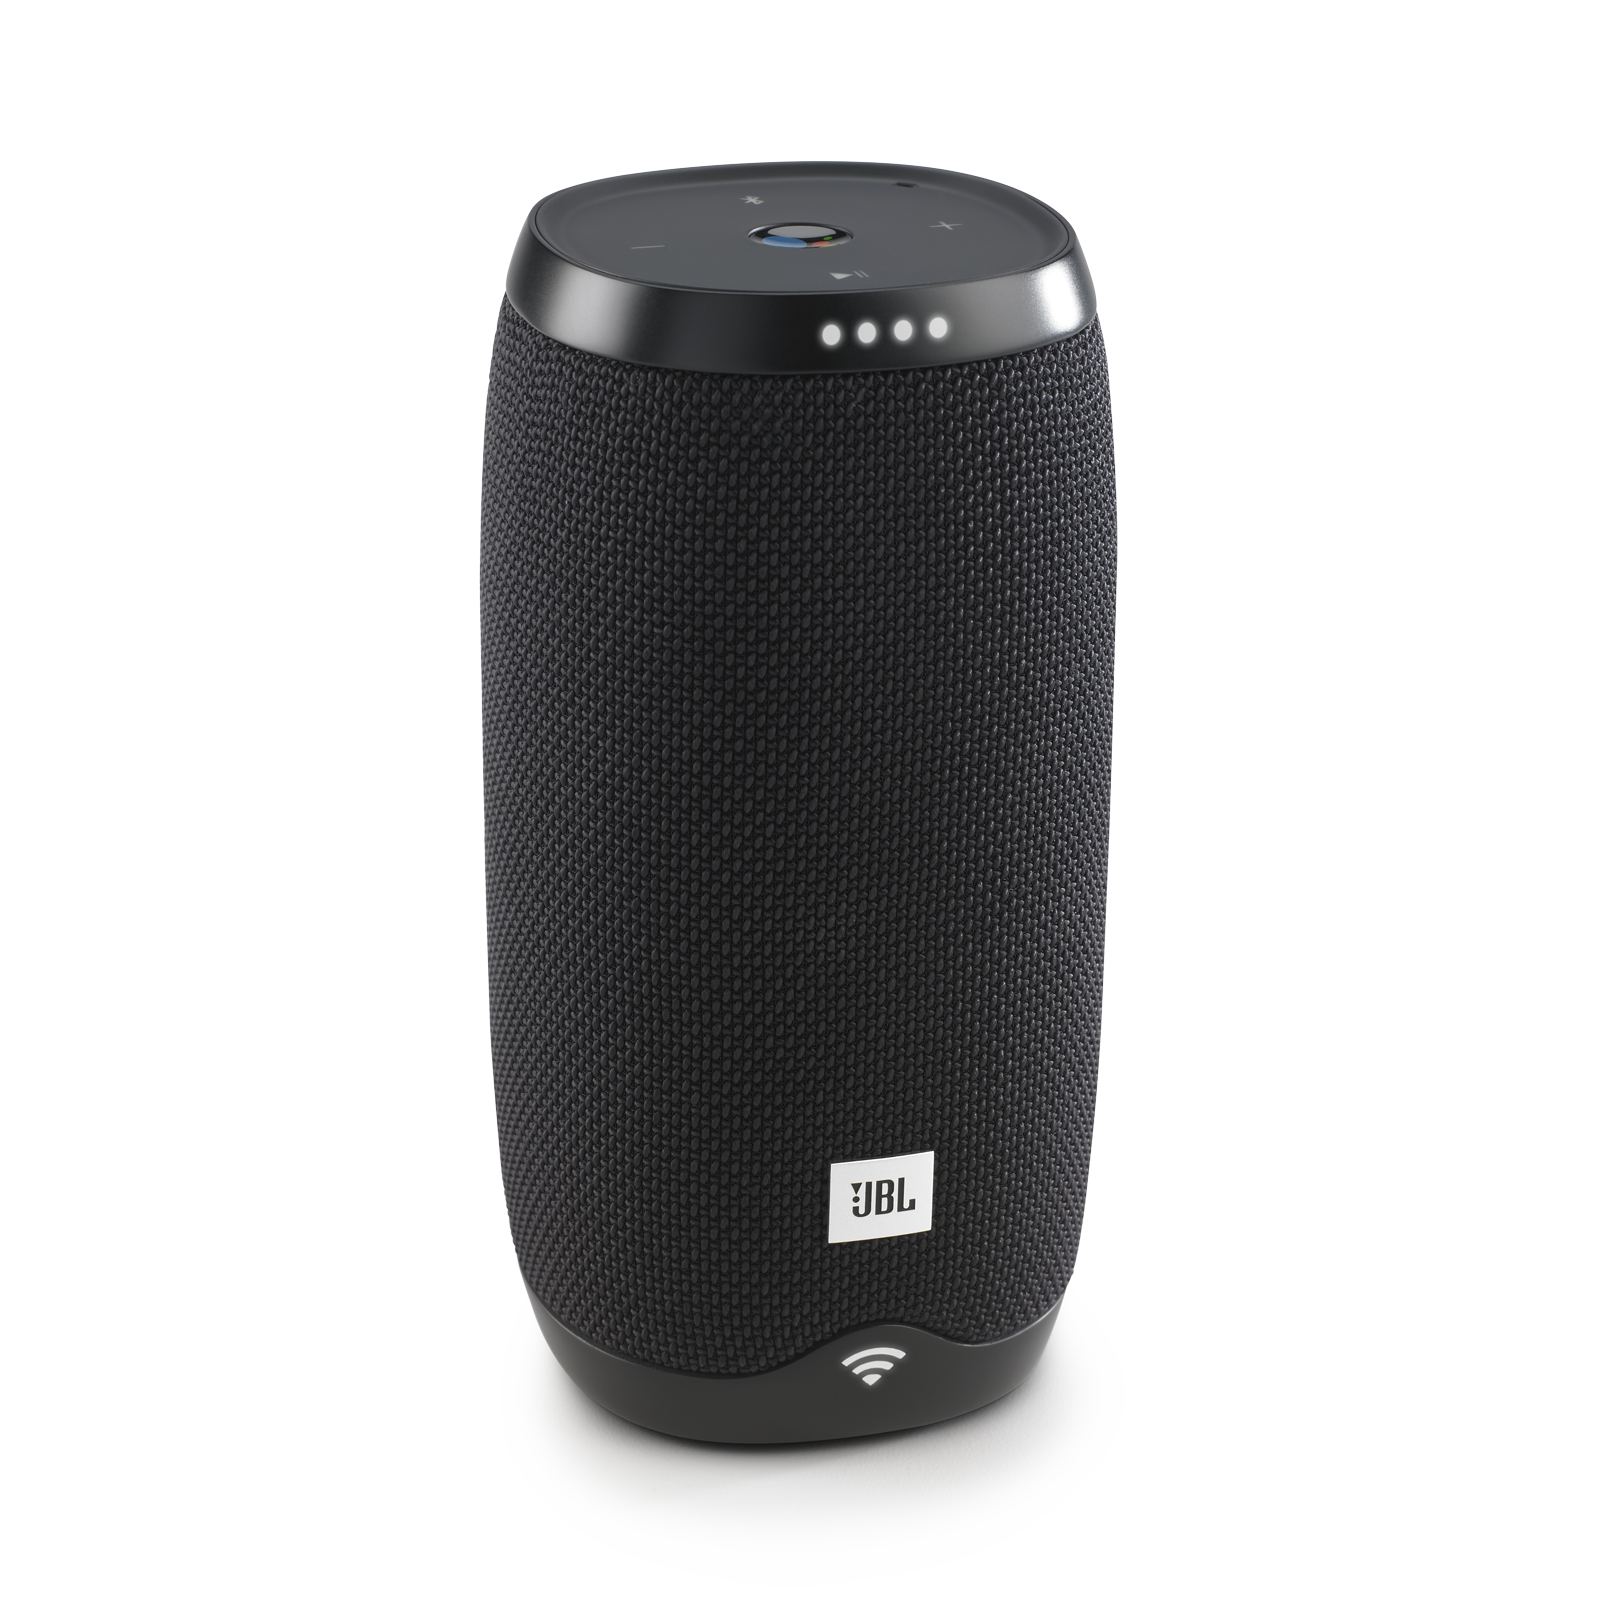 Save $90 on Link 10. Voice-Activated Portable Speaker with Google Assistant Built-In. Sale price $59.95. Shop now.